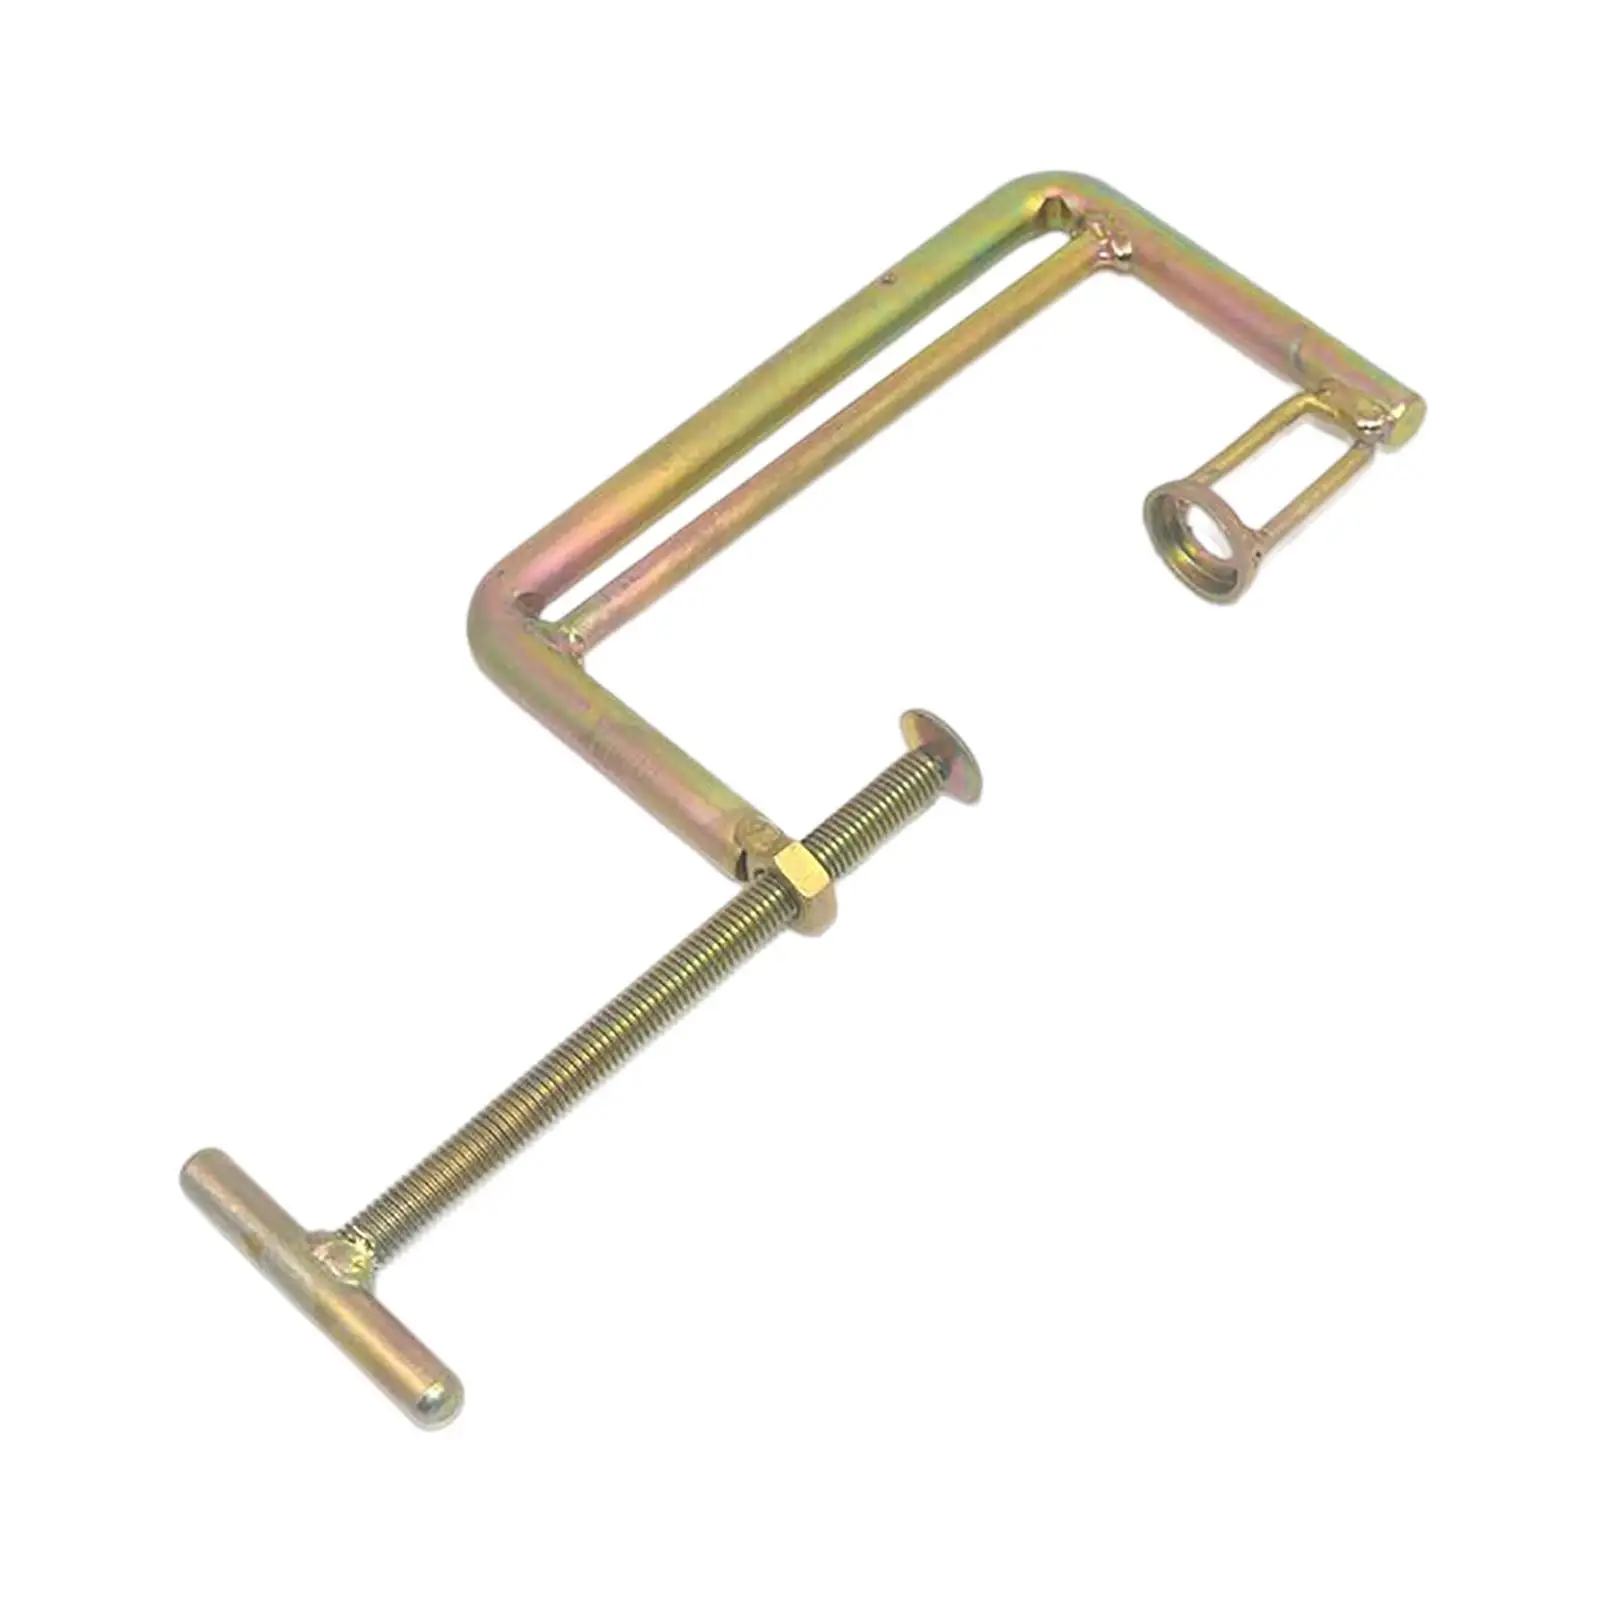 Valve Spring Clamps Sturdy Reliable Aluminum Compressor Valve Spring Compressor for Small Engines Stable Performance